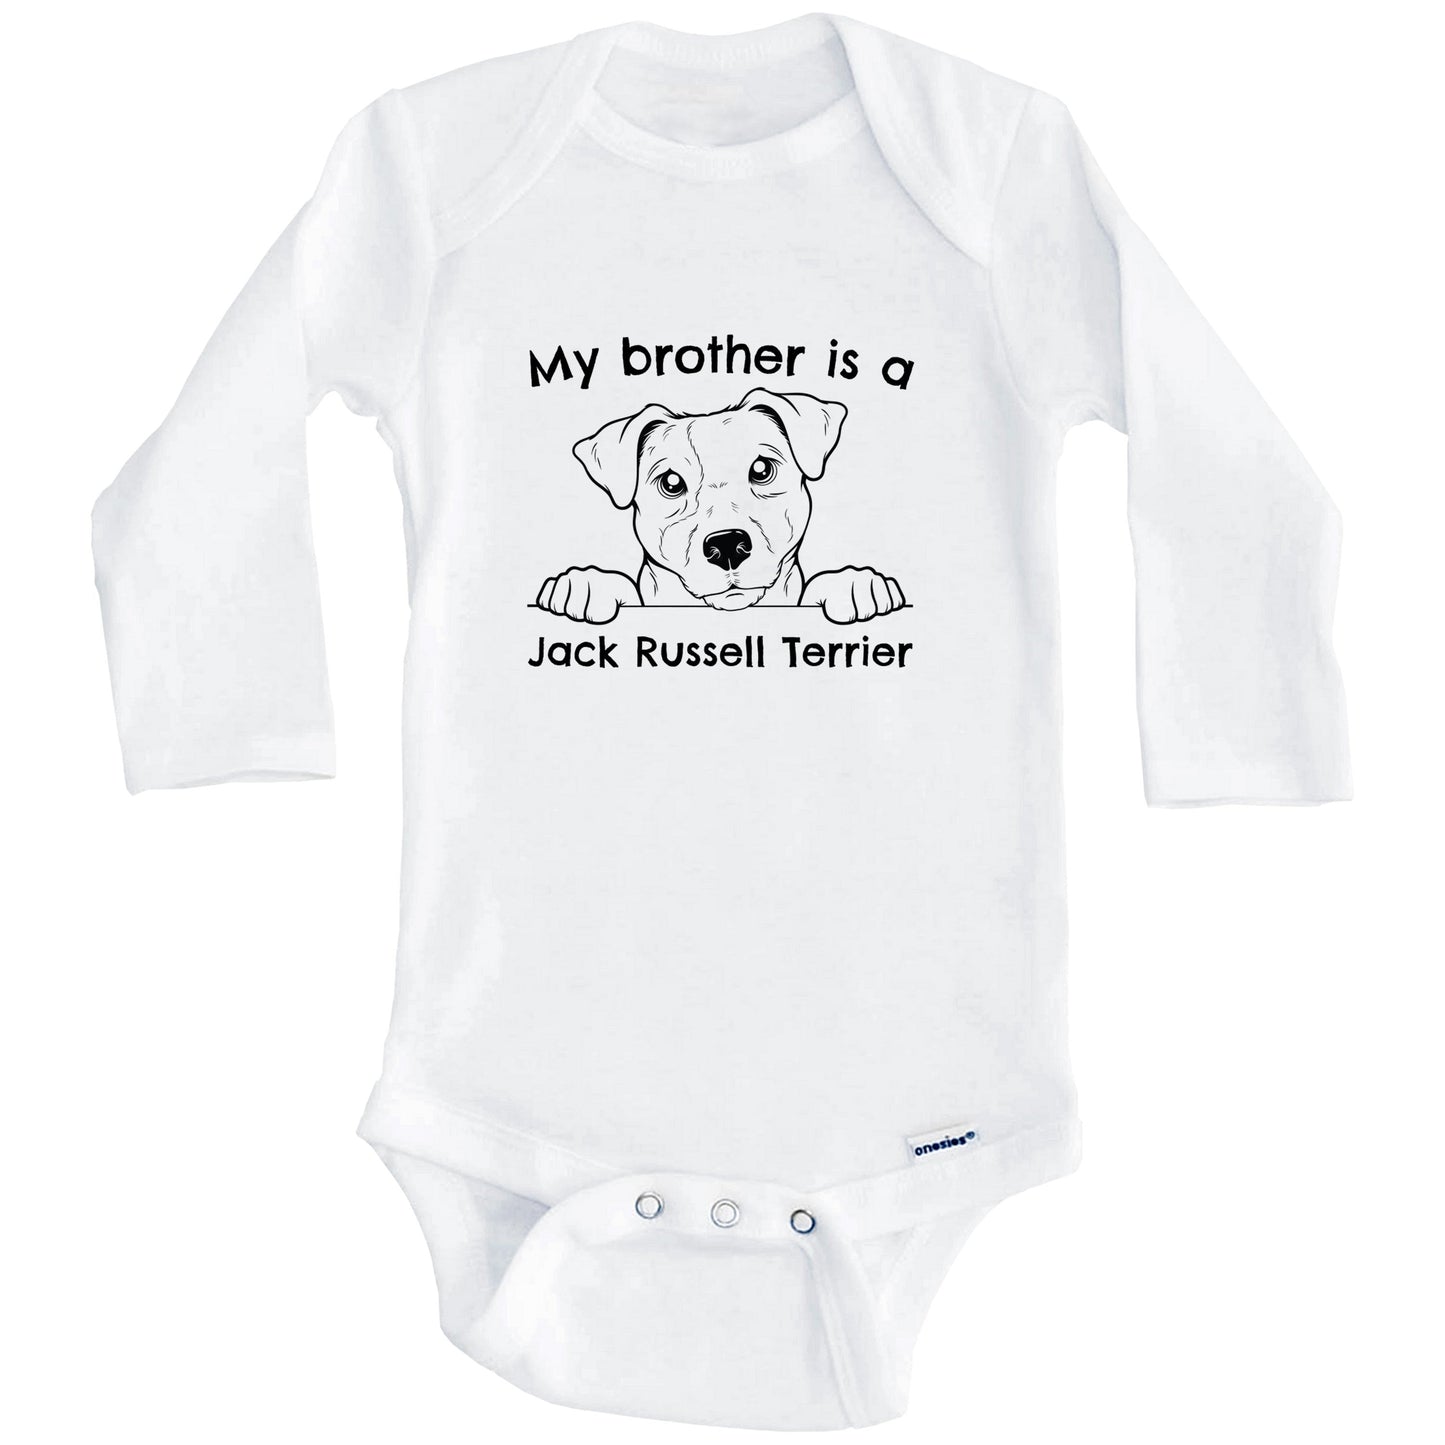 My Brother Is A Jack Russell Terrier One Piece Baby Bodysuit (Long Sleeves)